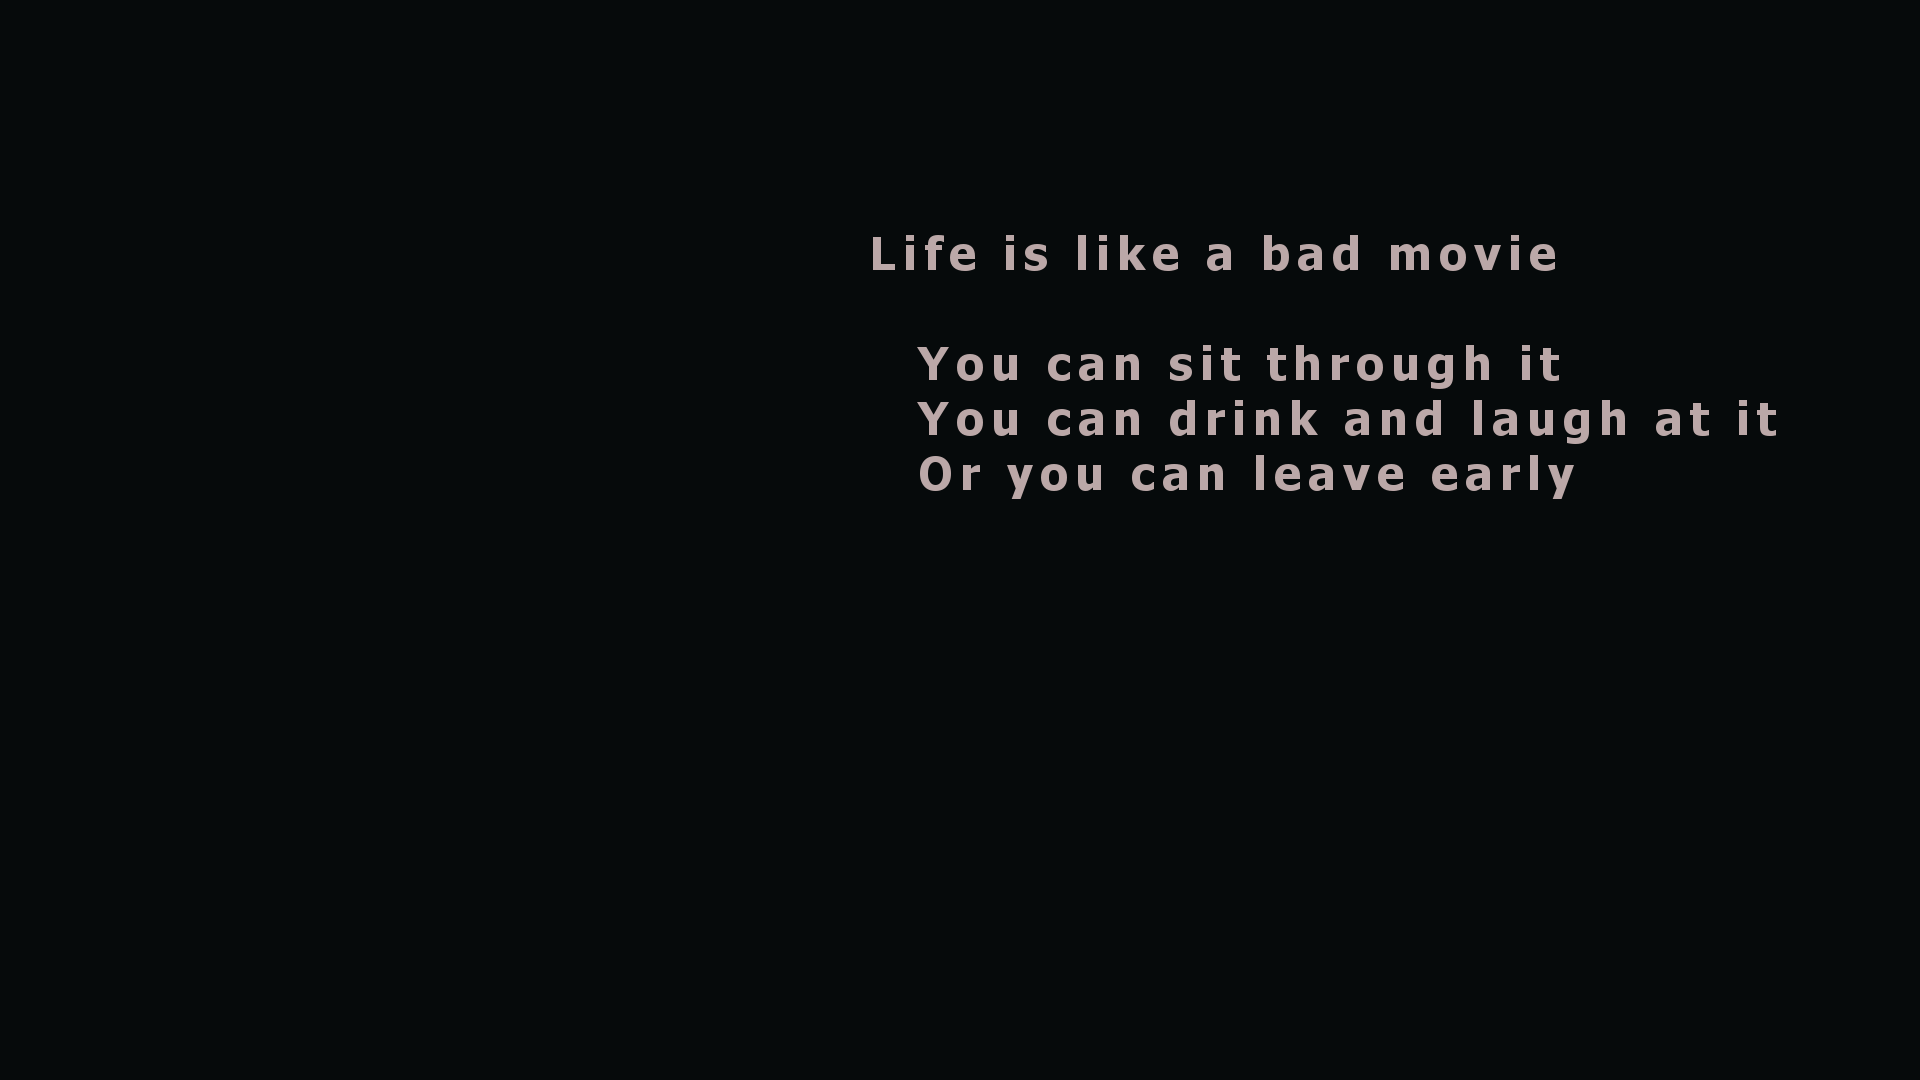 Life Quote Hd Wallpaper Image Free Hd For Desktops